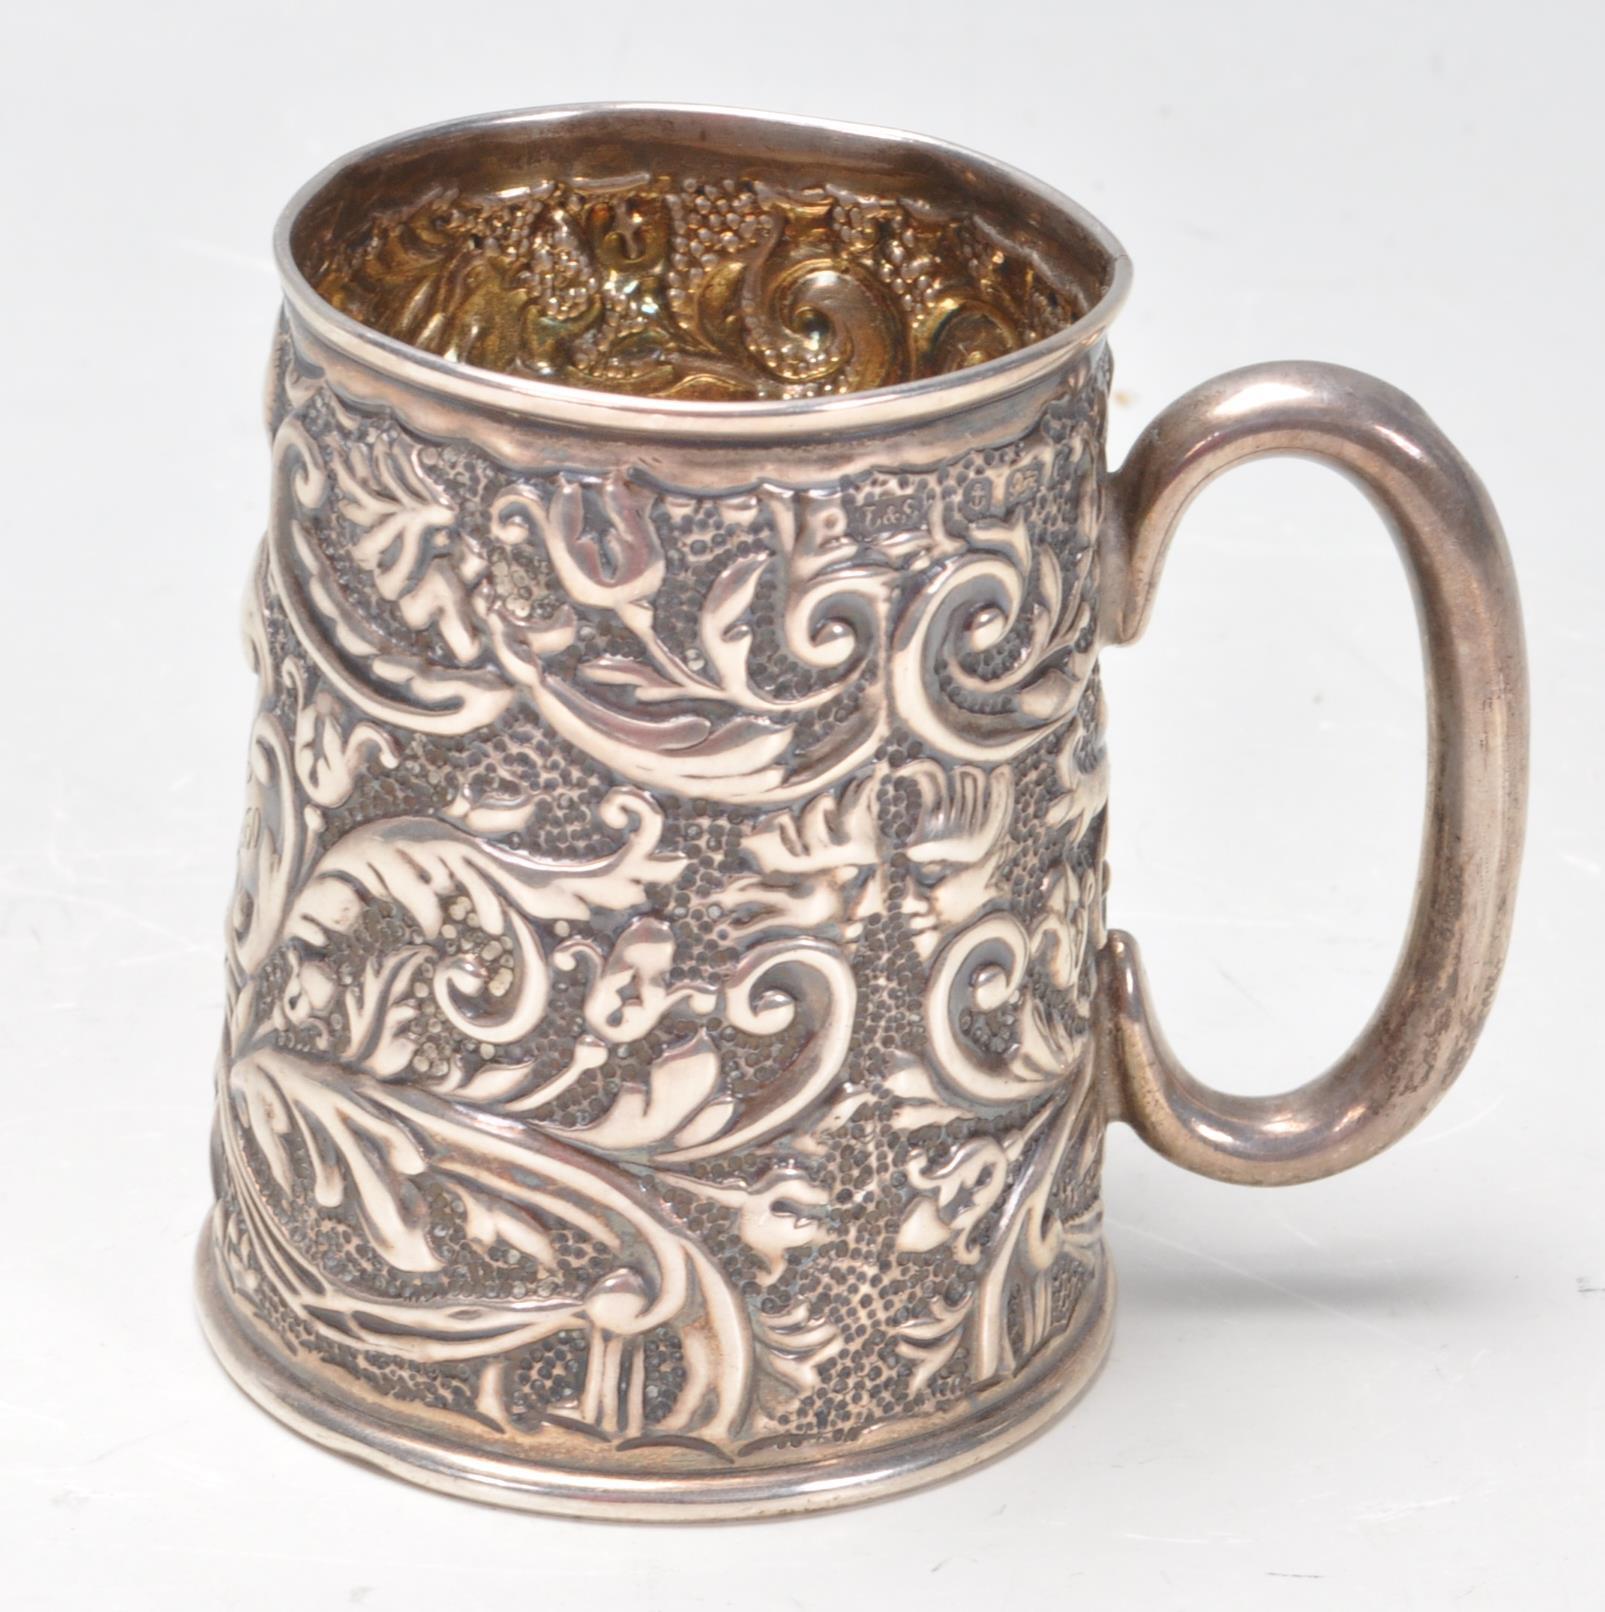 EDWARDIAN SILVER CHRISTENING CUP